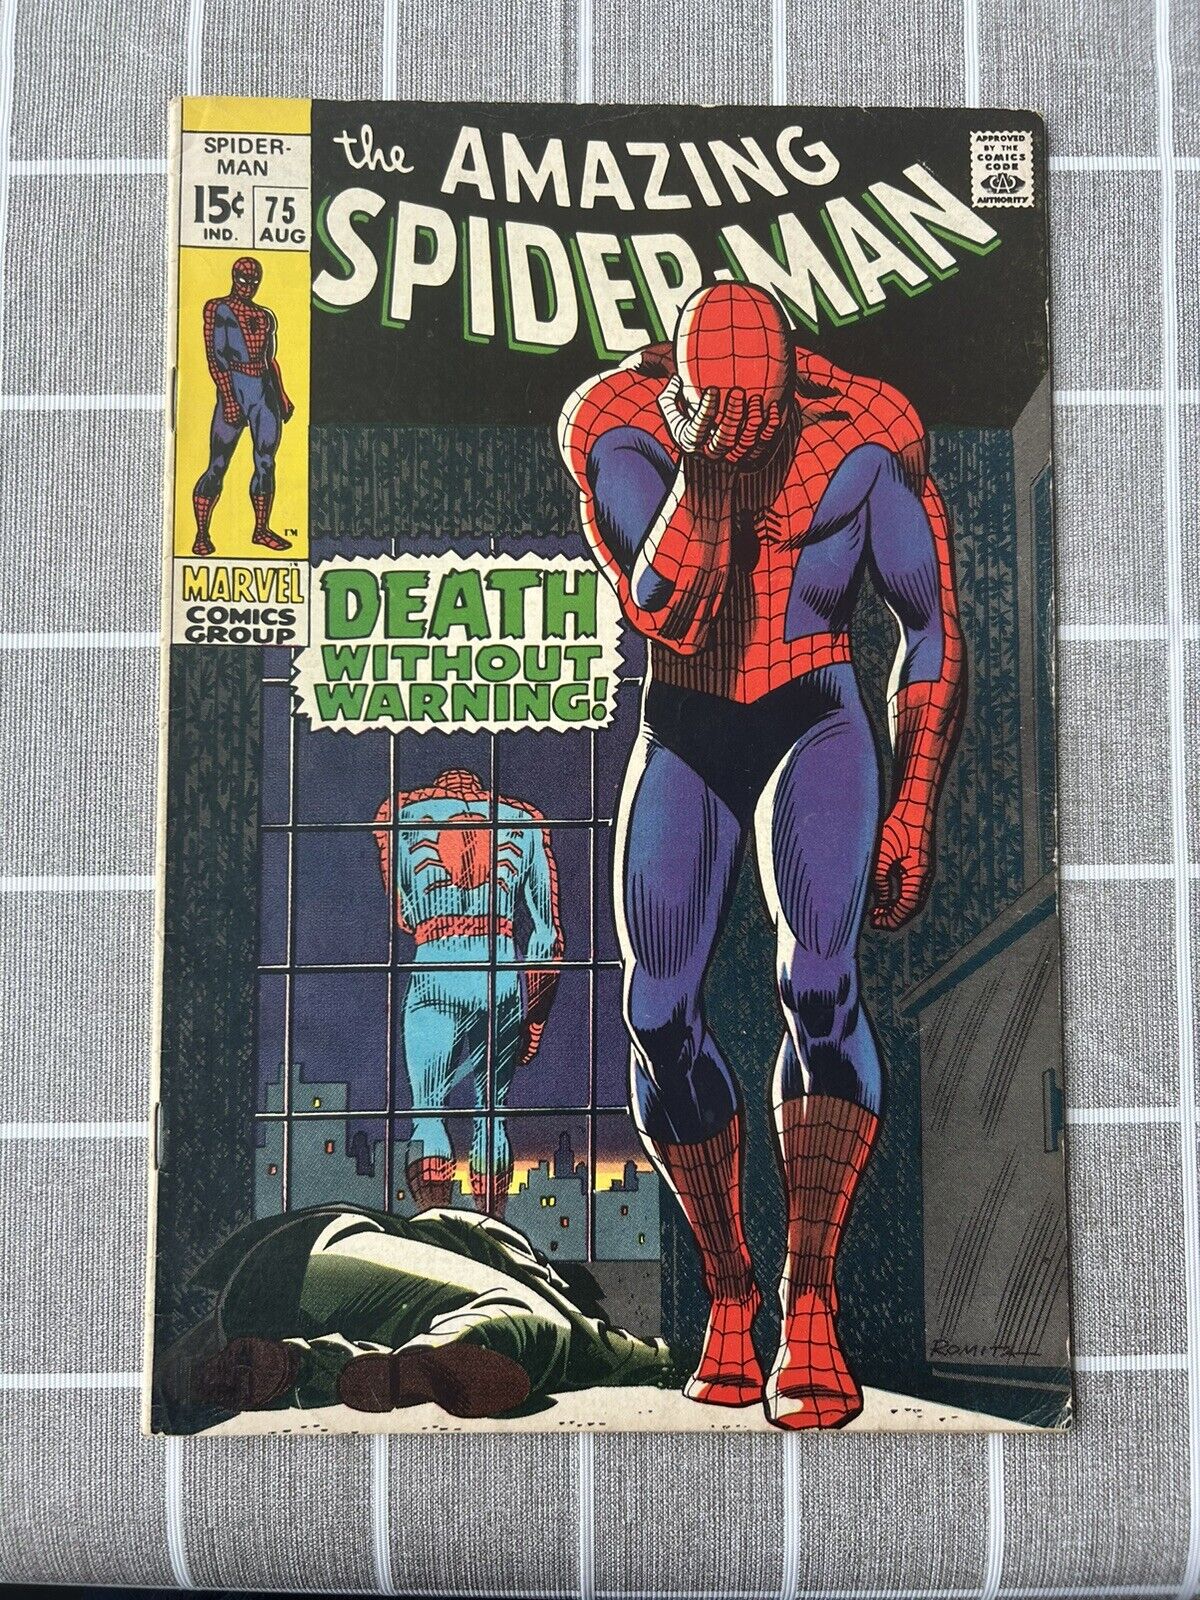 The Amazing Spider Man #75 Death Without Warning Vintage Marvel 1969 VF+